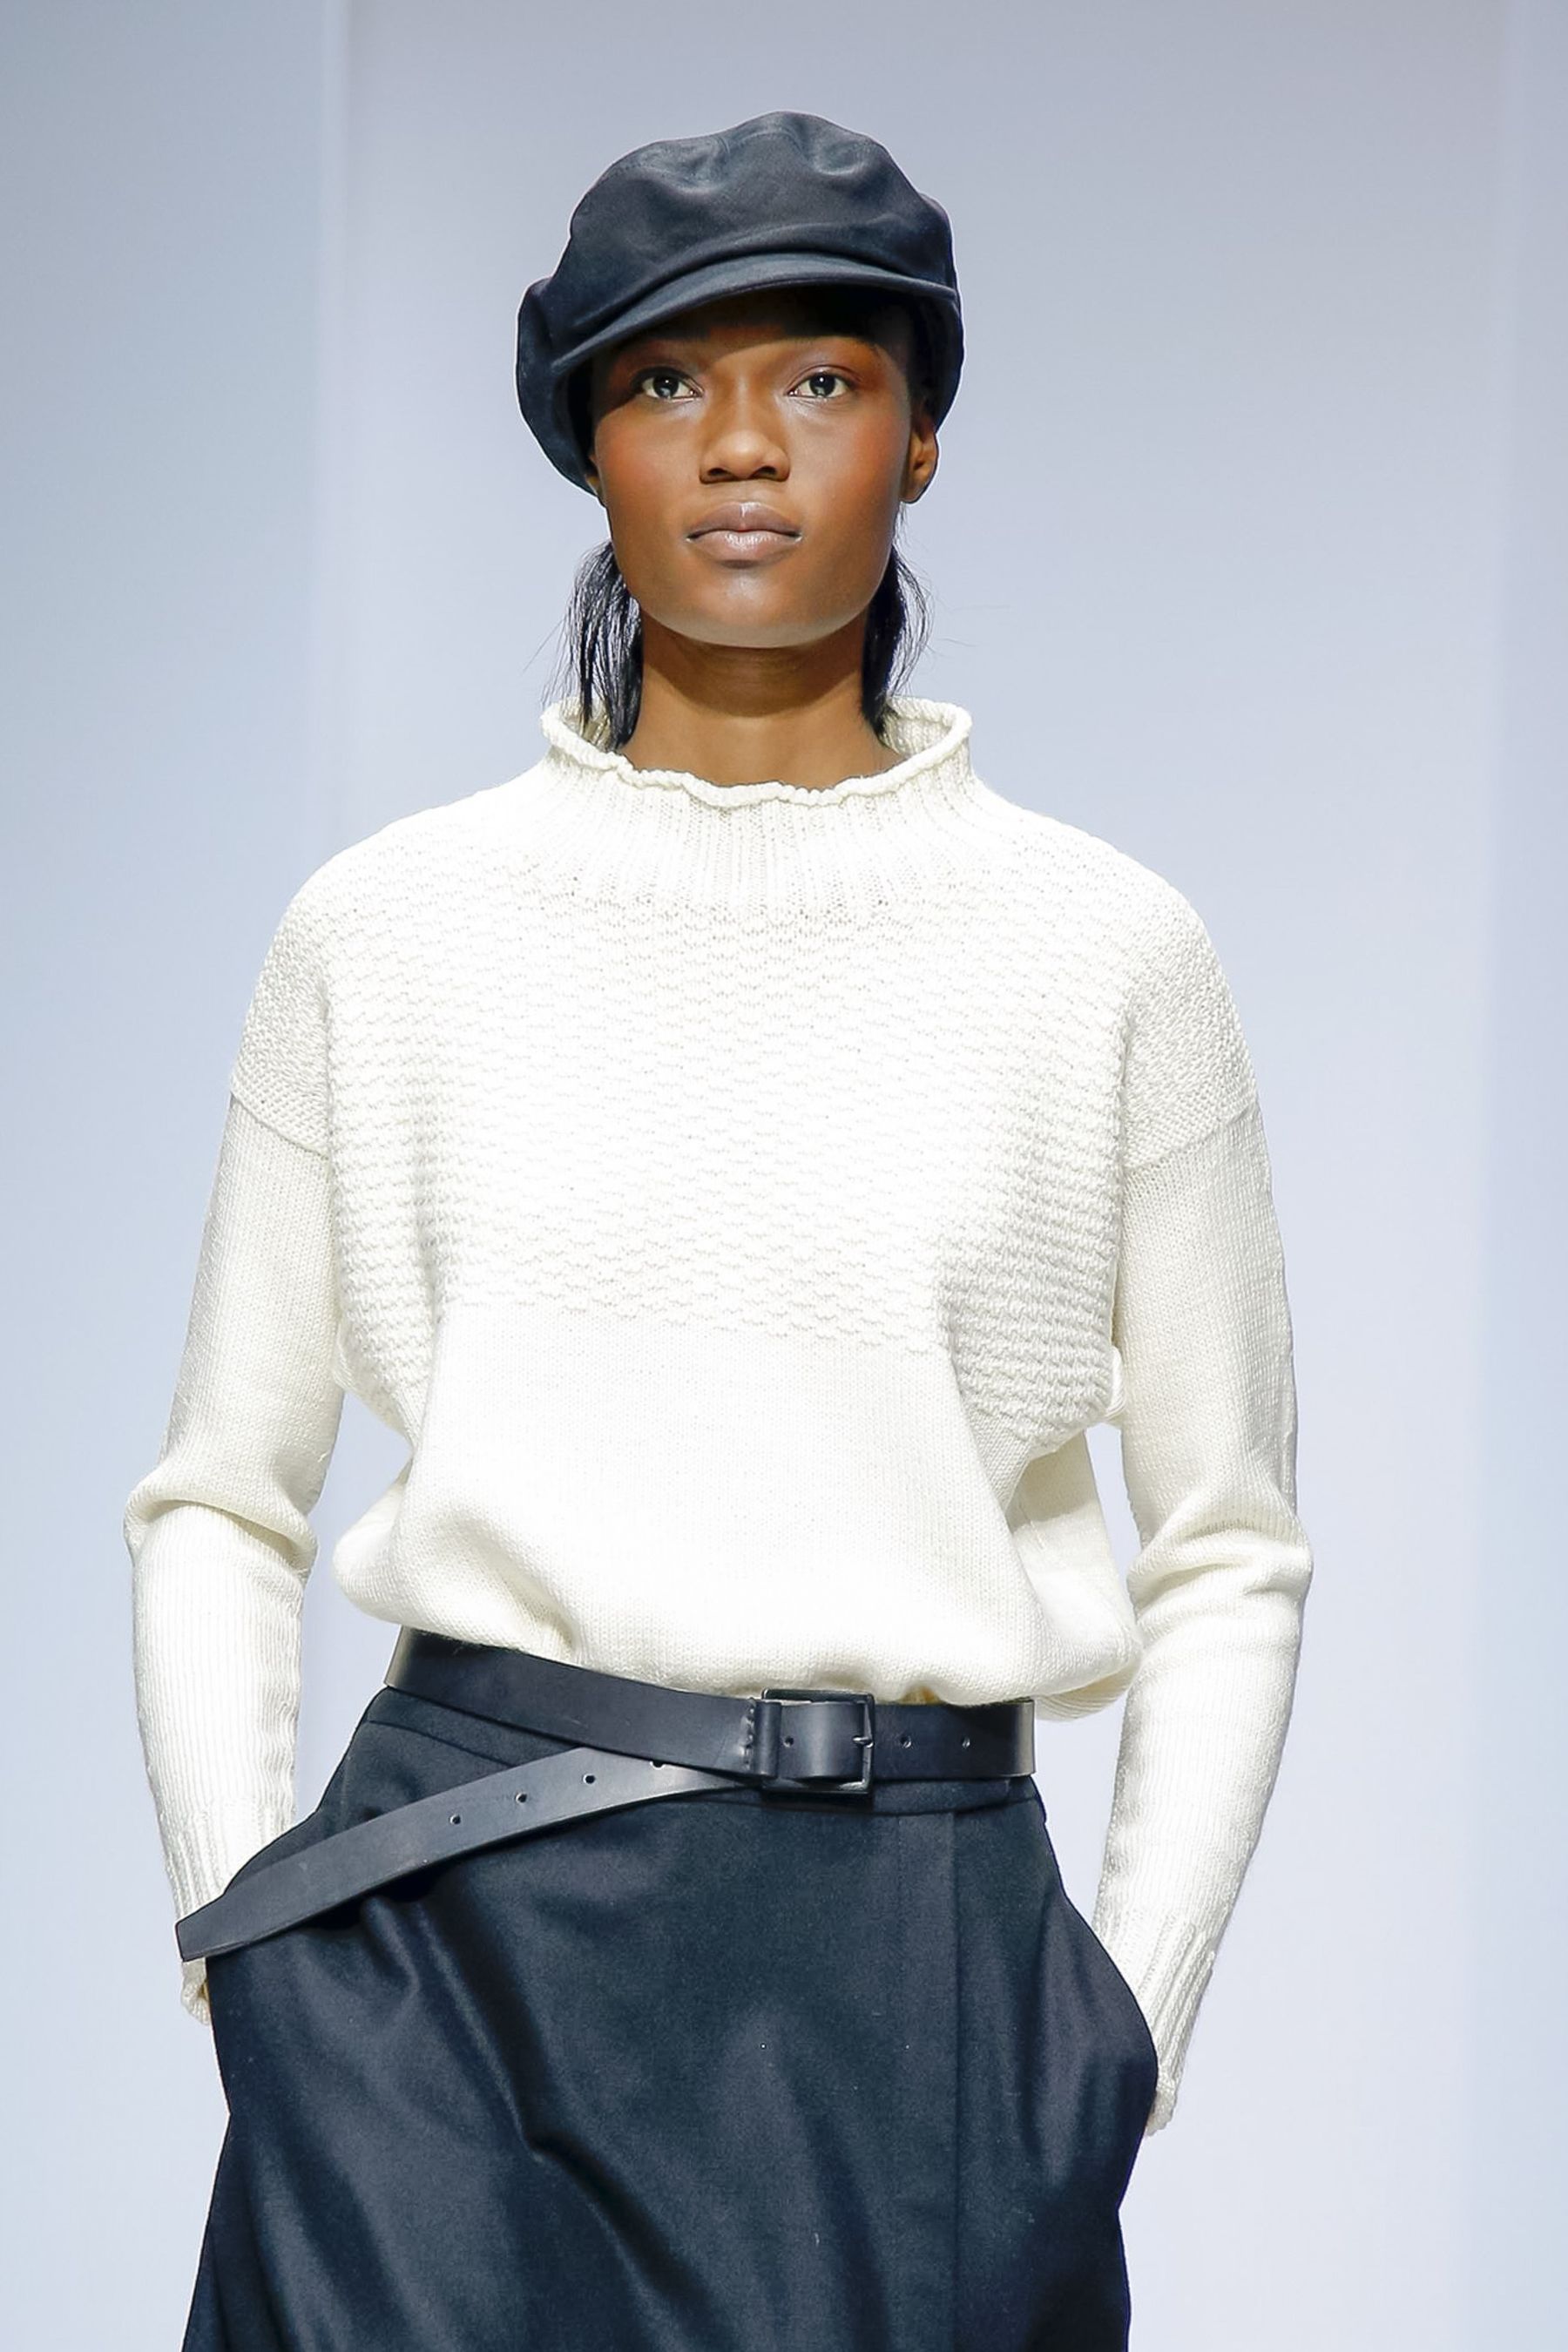 Margaret Howell Fall Winter 2019-20 Fashion Show